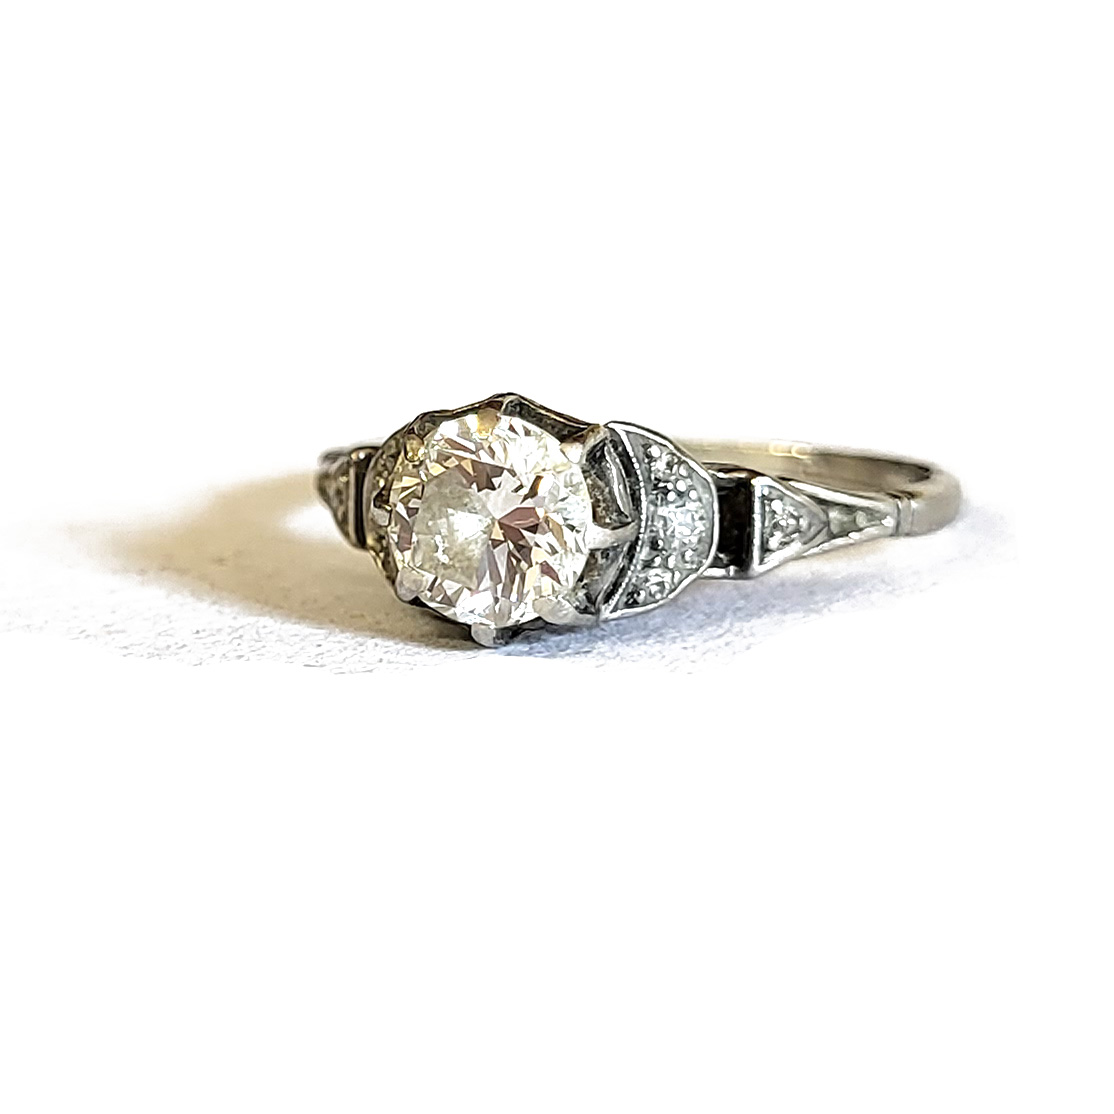 AN EARLY 20TH CENTURY WHITE METAL AND DIAMOND SOLITAIRE RING Having a single round cut diamond in an